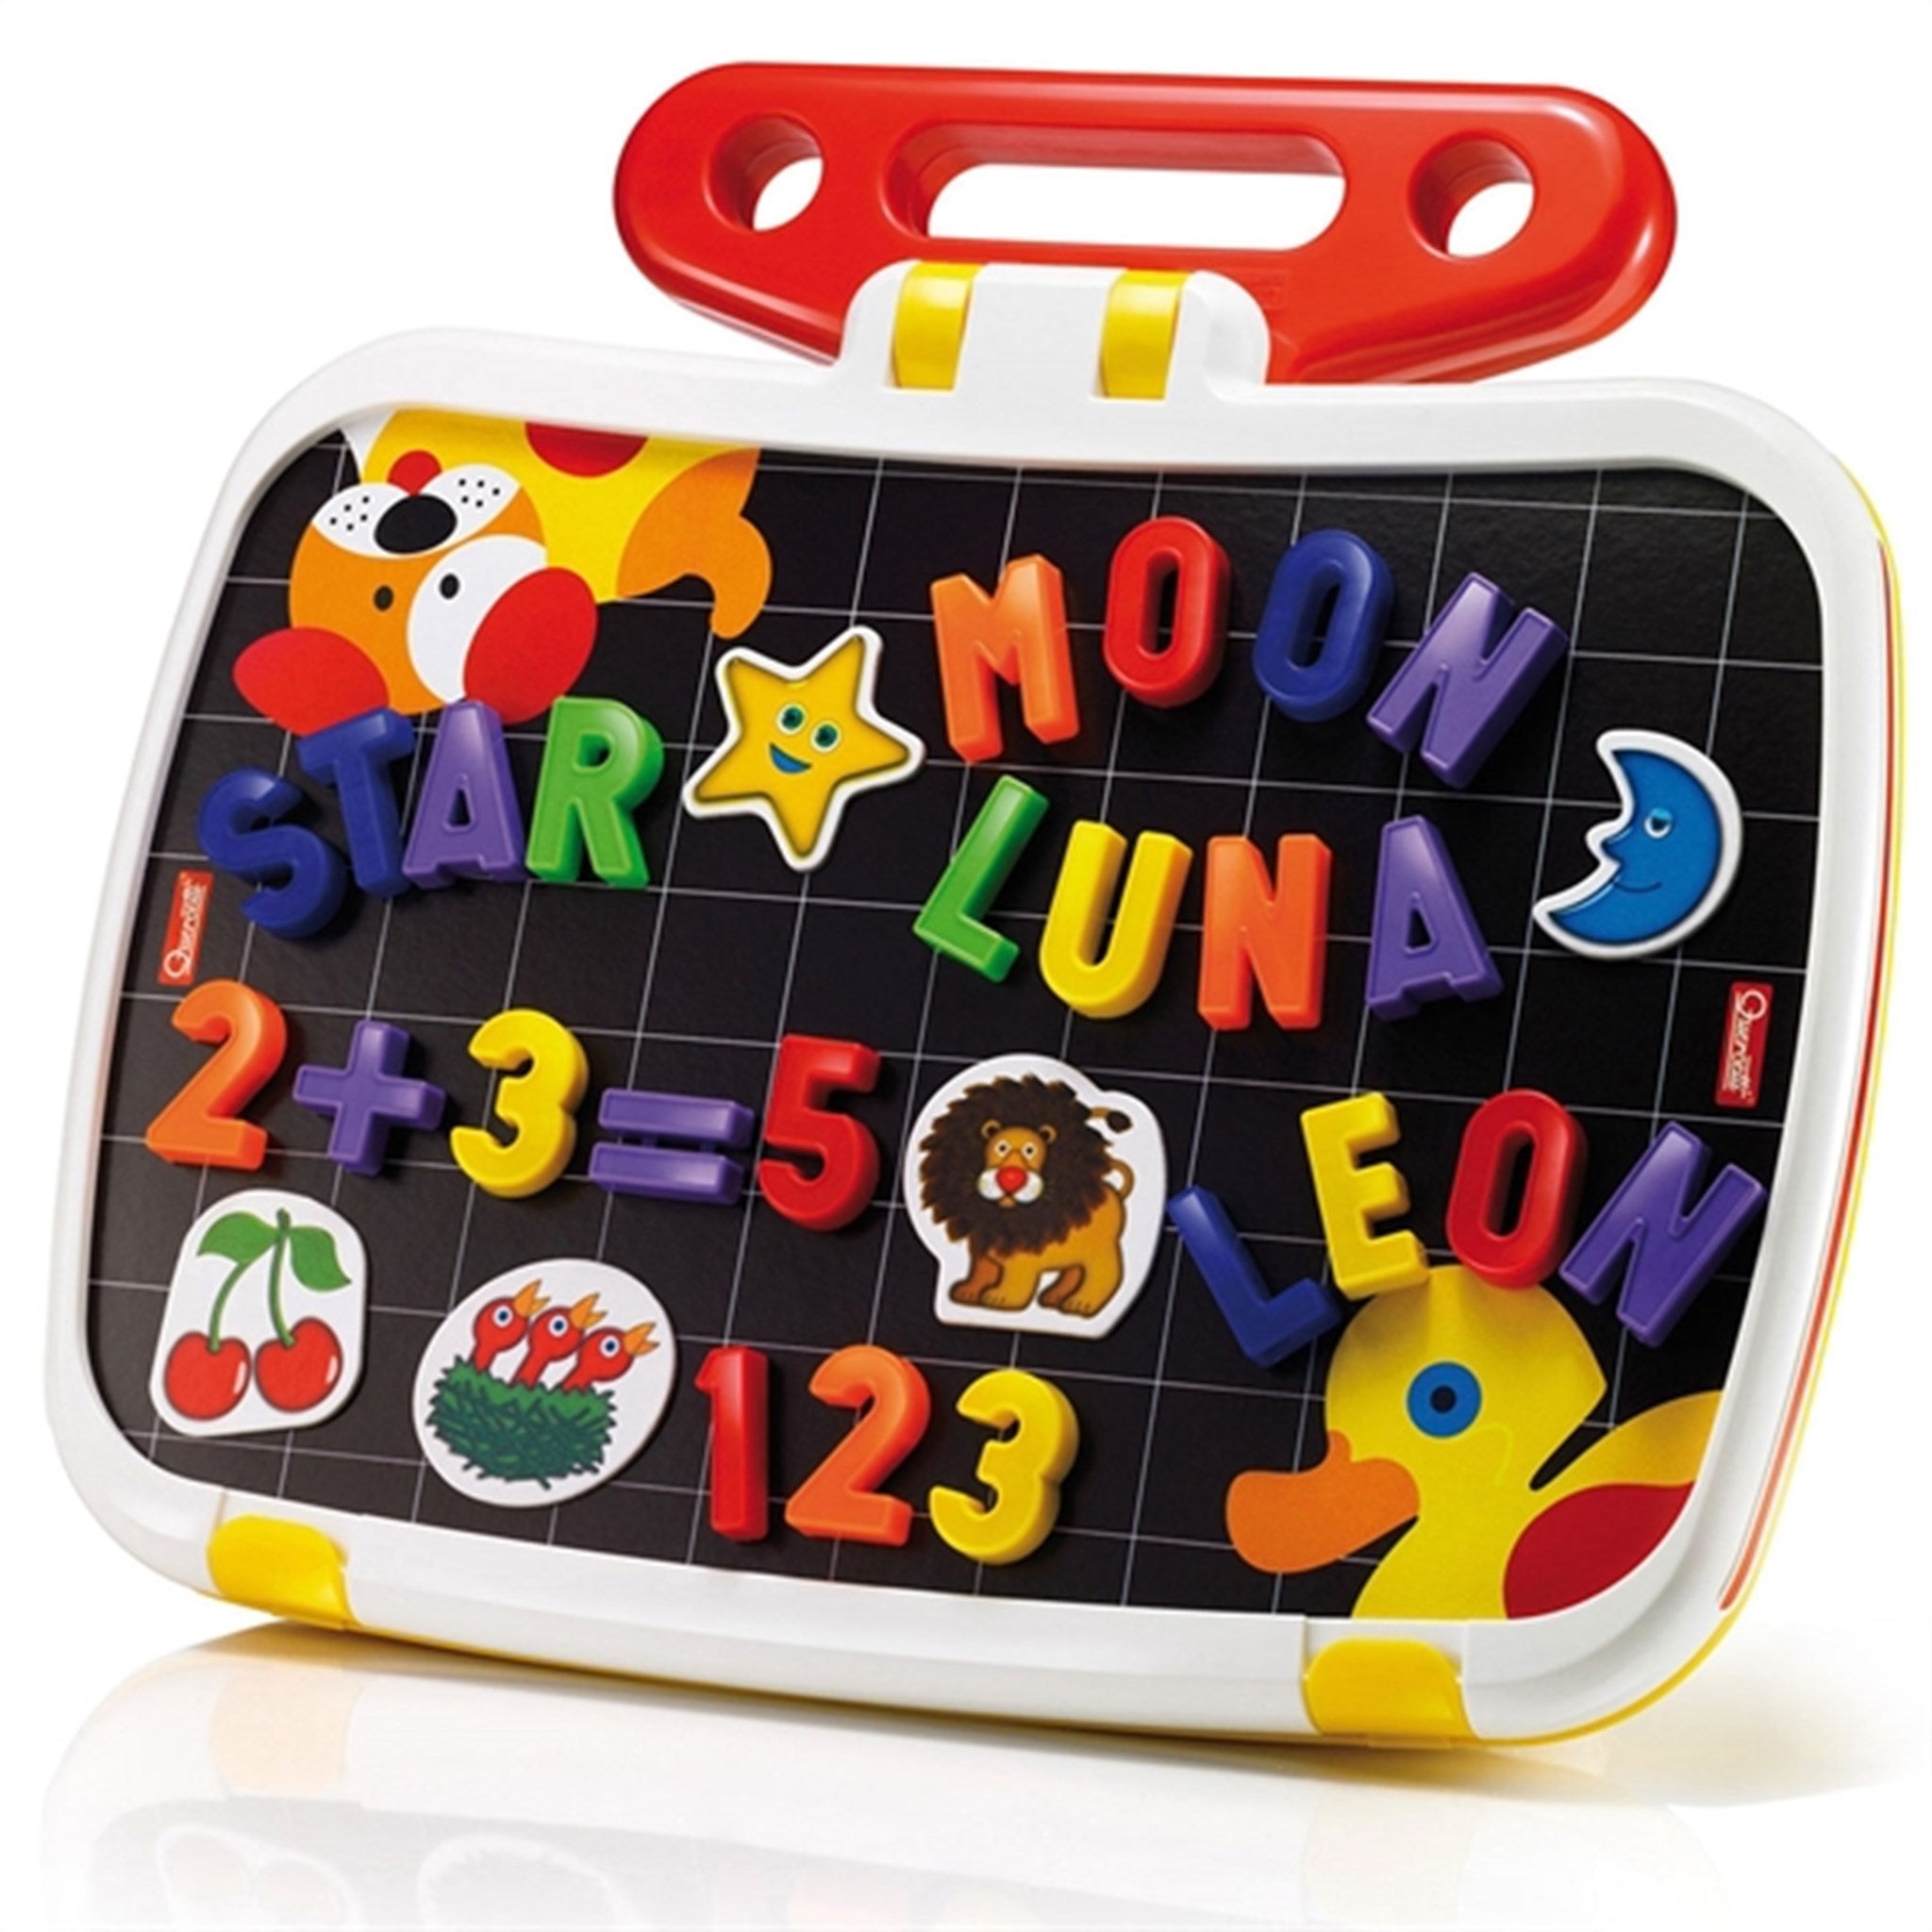 Quercetti Combi ABC + 123 - Magnetic Tablet with Letters and Numbers